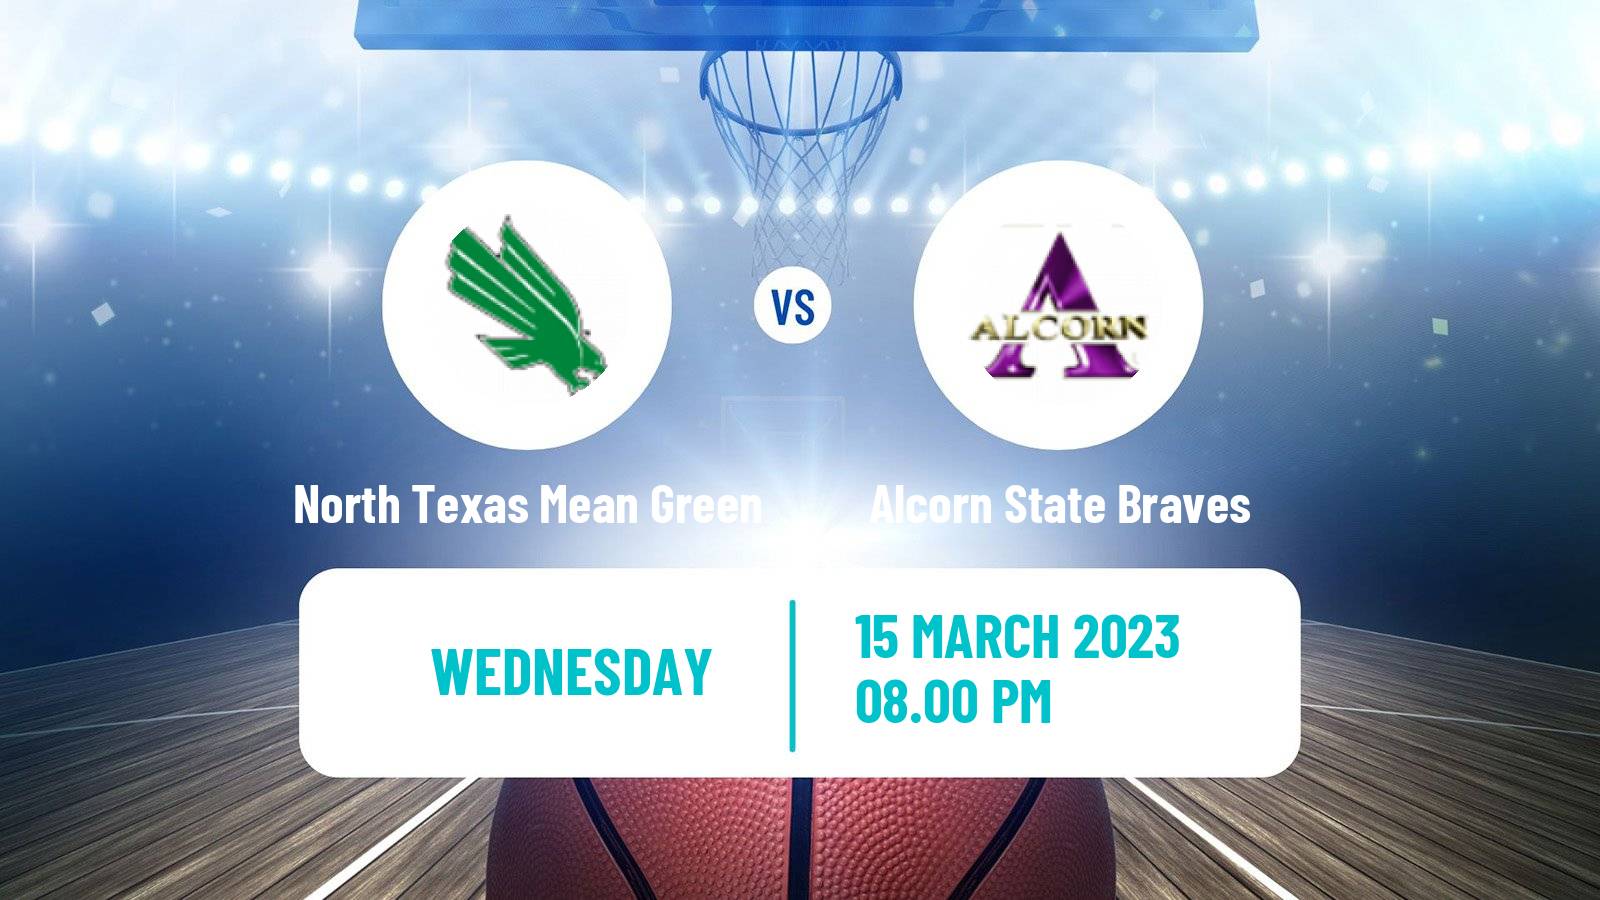 Basketball NIT North Texas Mean Green - Alcorn State Braves